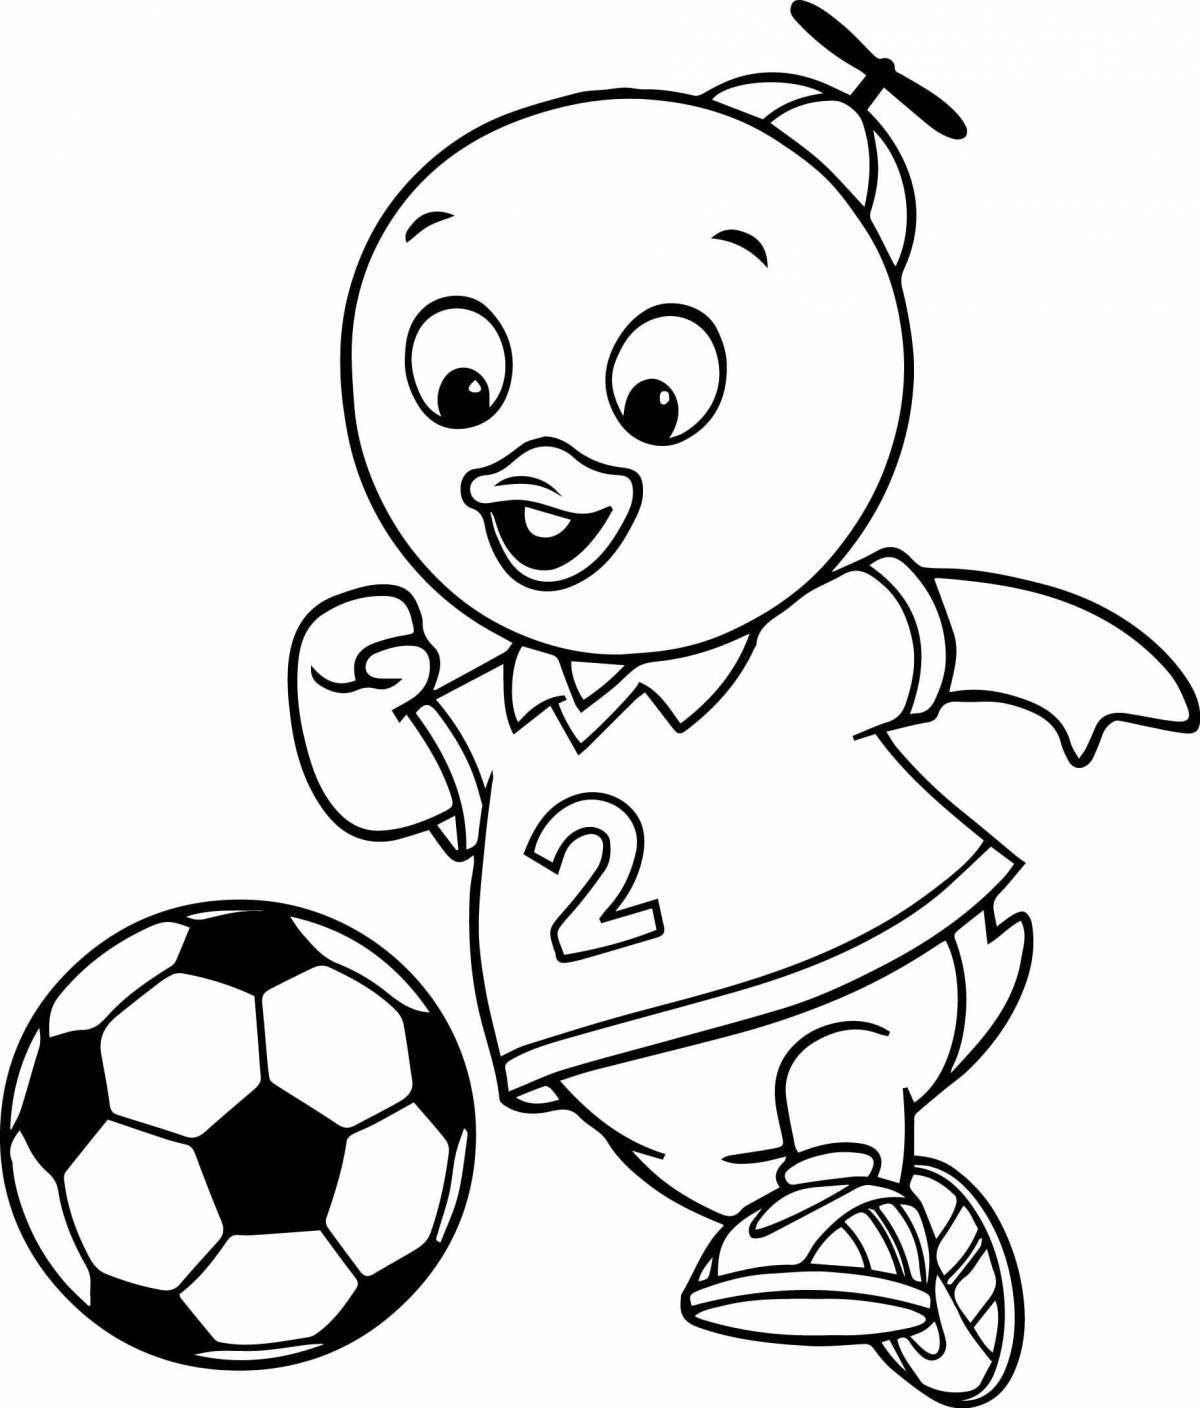 Dynamic sports coloring book for kids